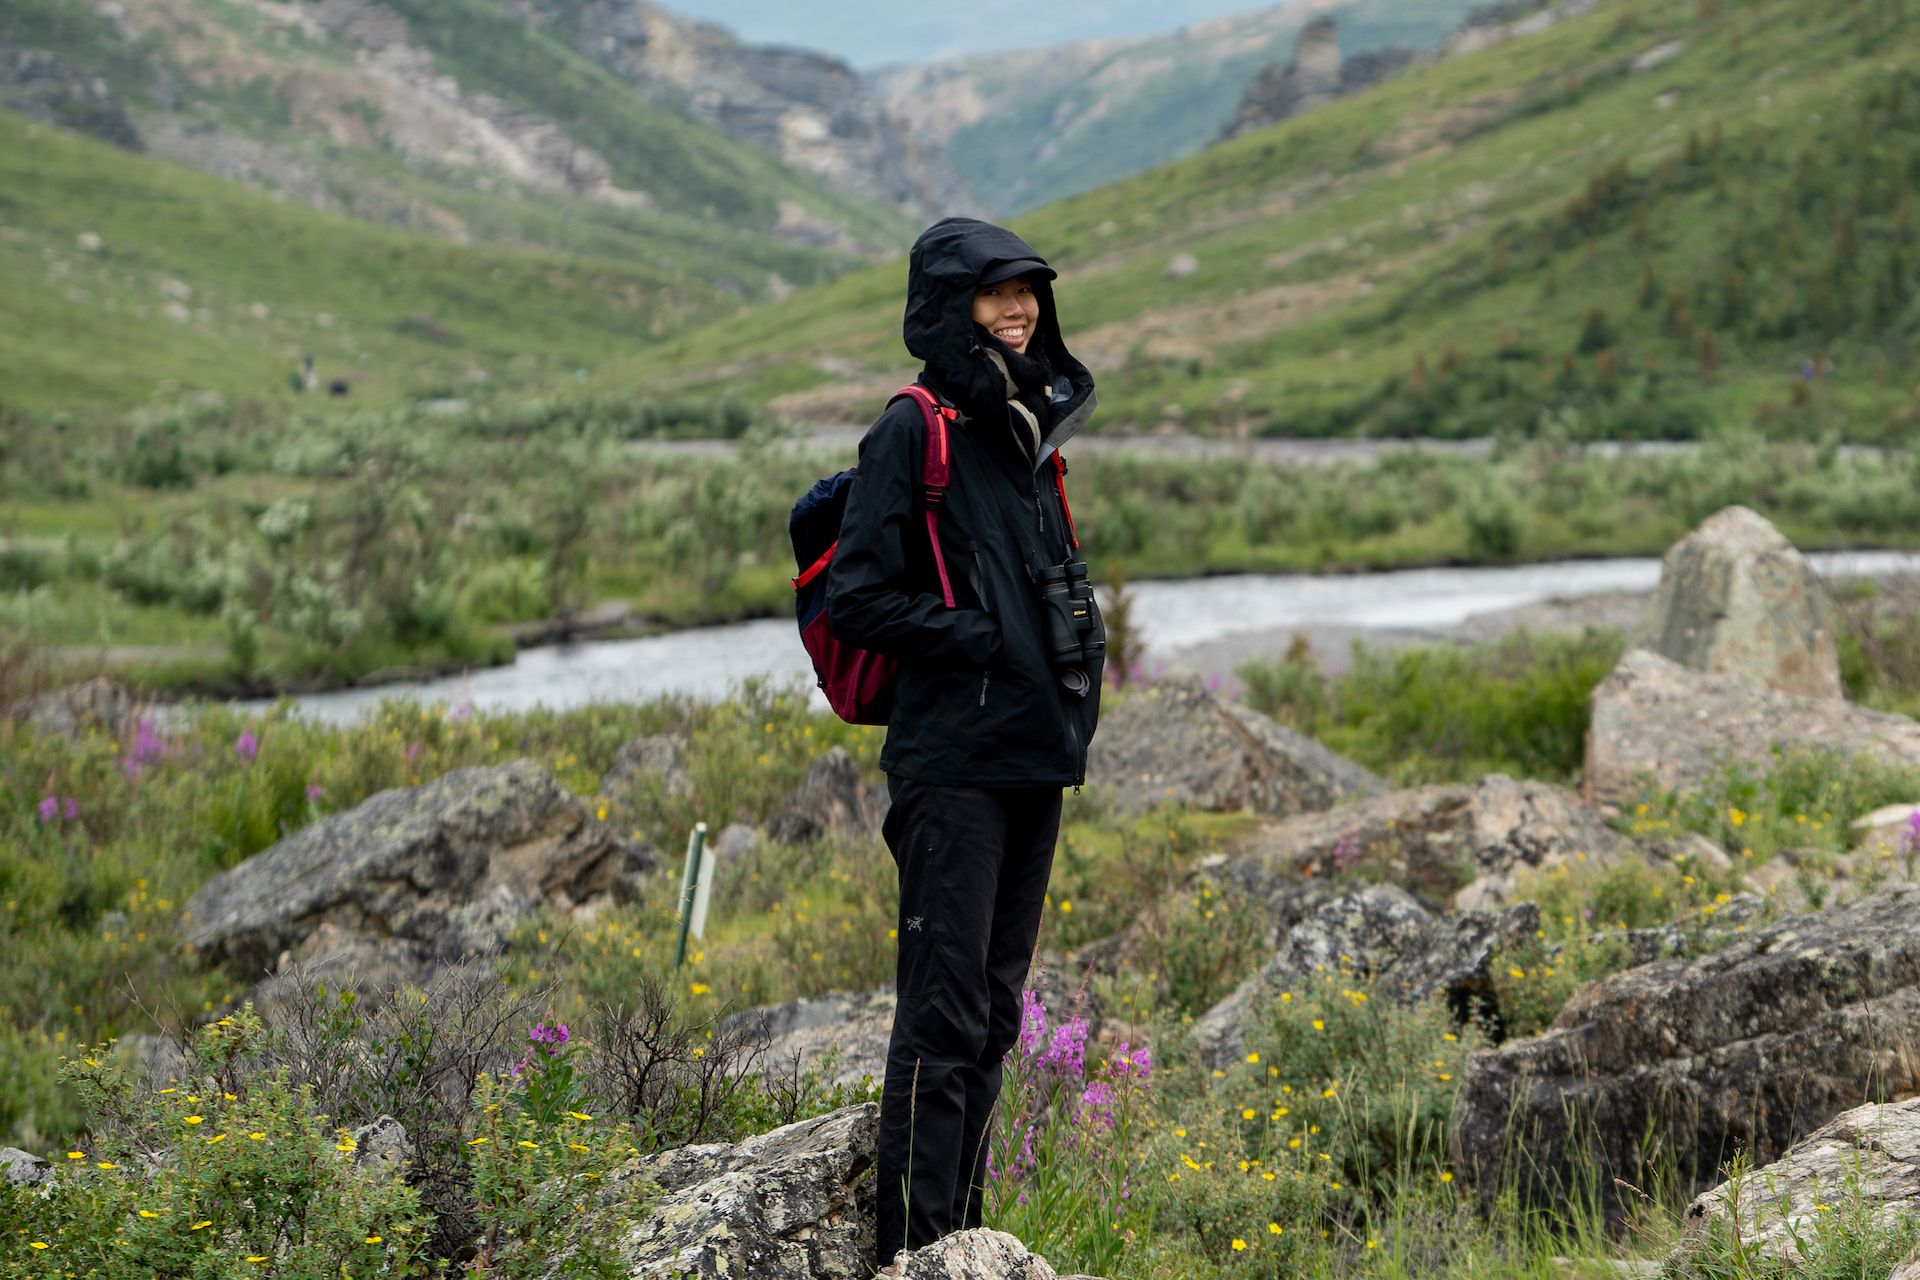 Hiking by Savage River in Denali National Park